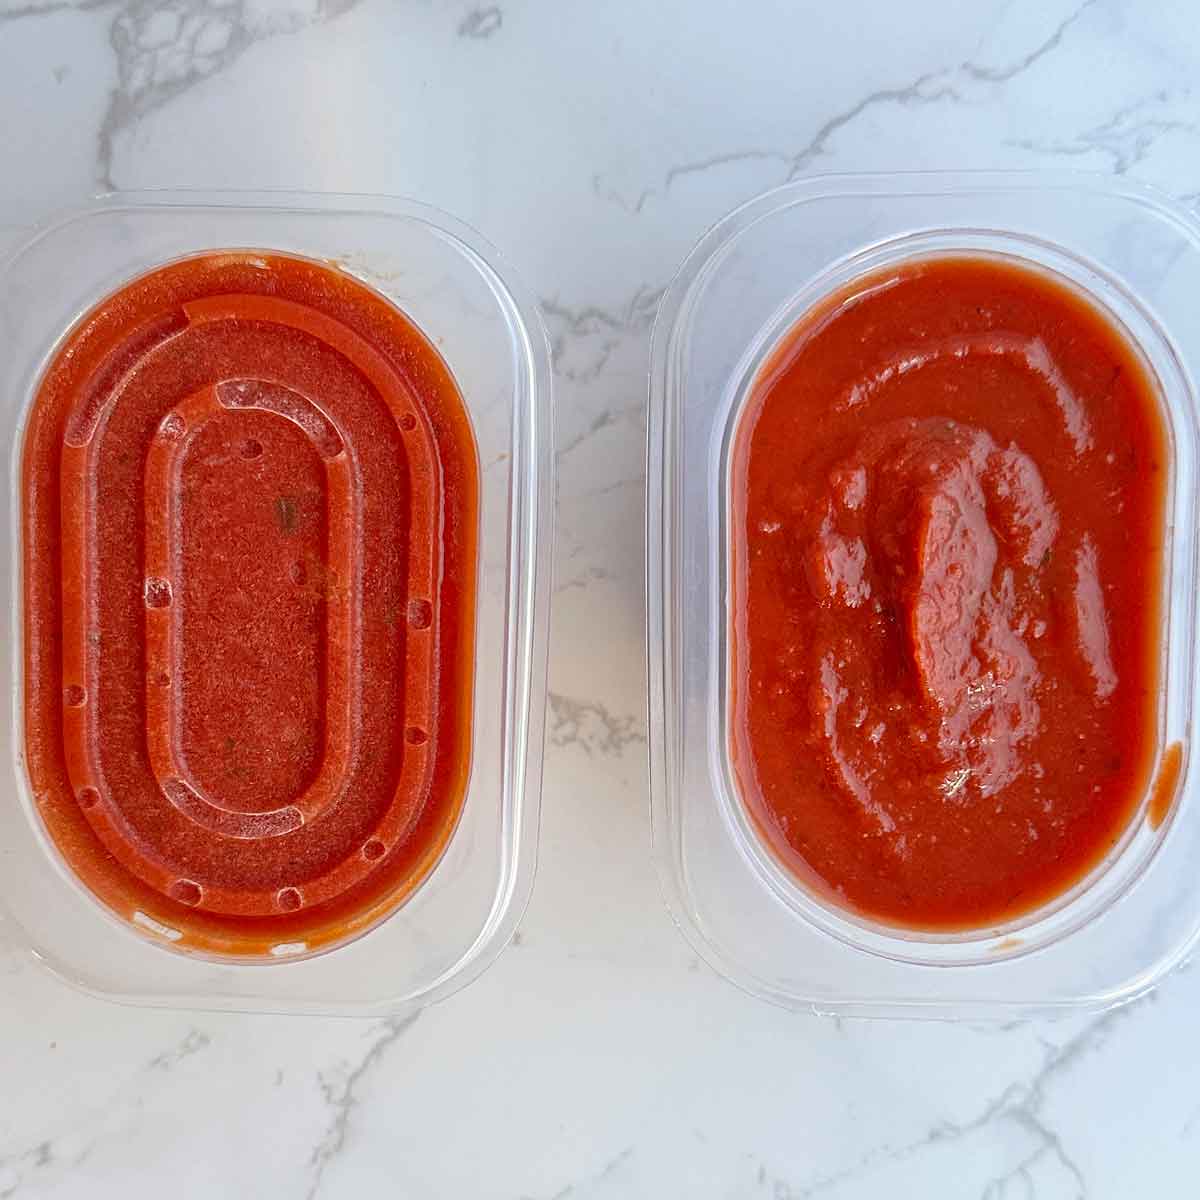 frozen and thawed pasta sauce in containers.